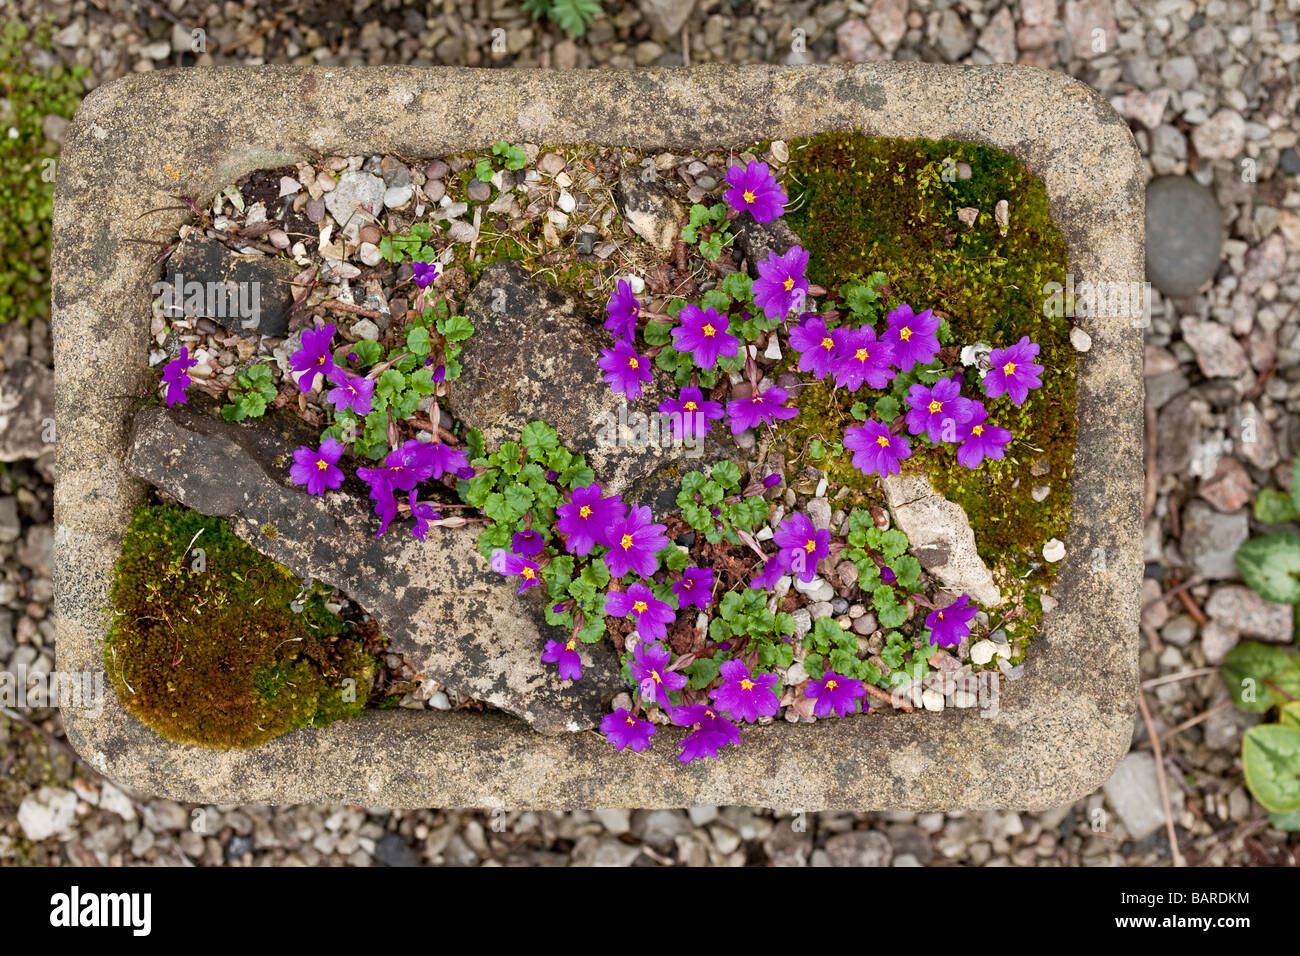 Dwarf Primulas growing in a stone trough Stock Photo